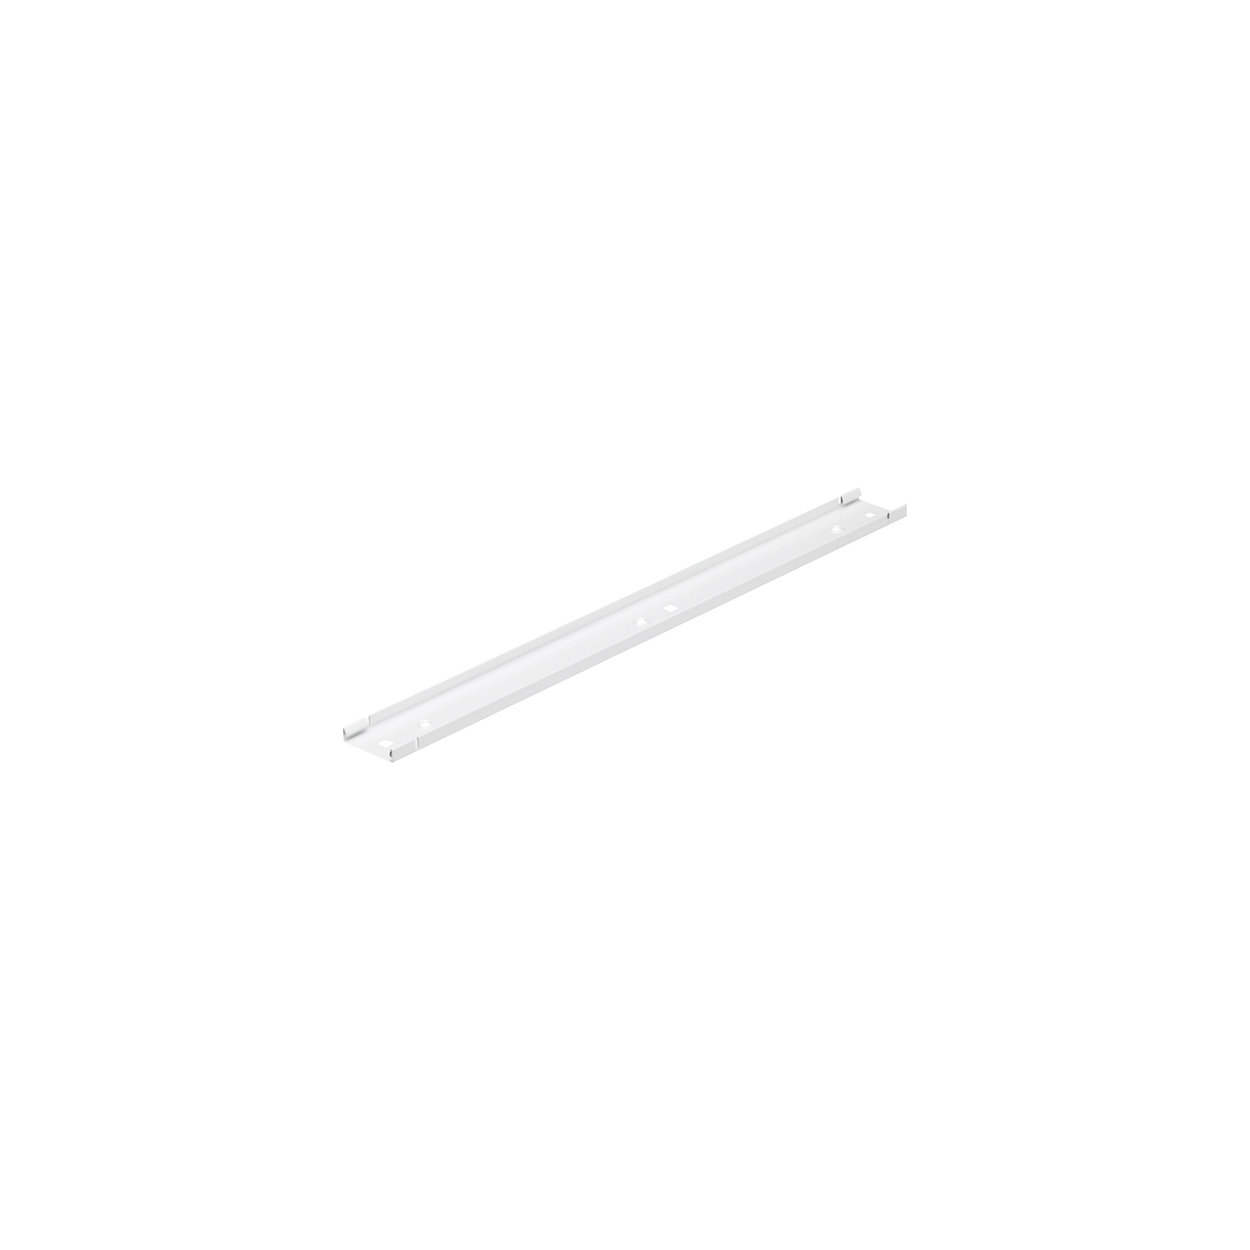 eW Profile Powercore – Under-cabinet white light LED fixture with an ultra low profile